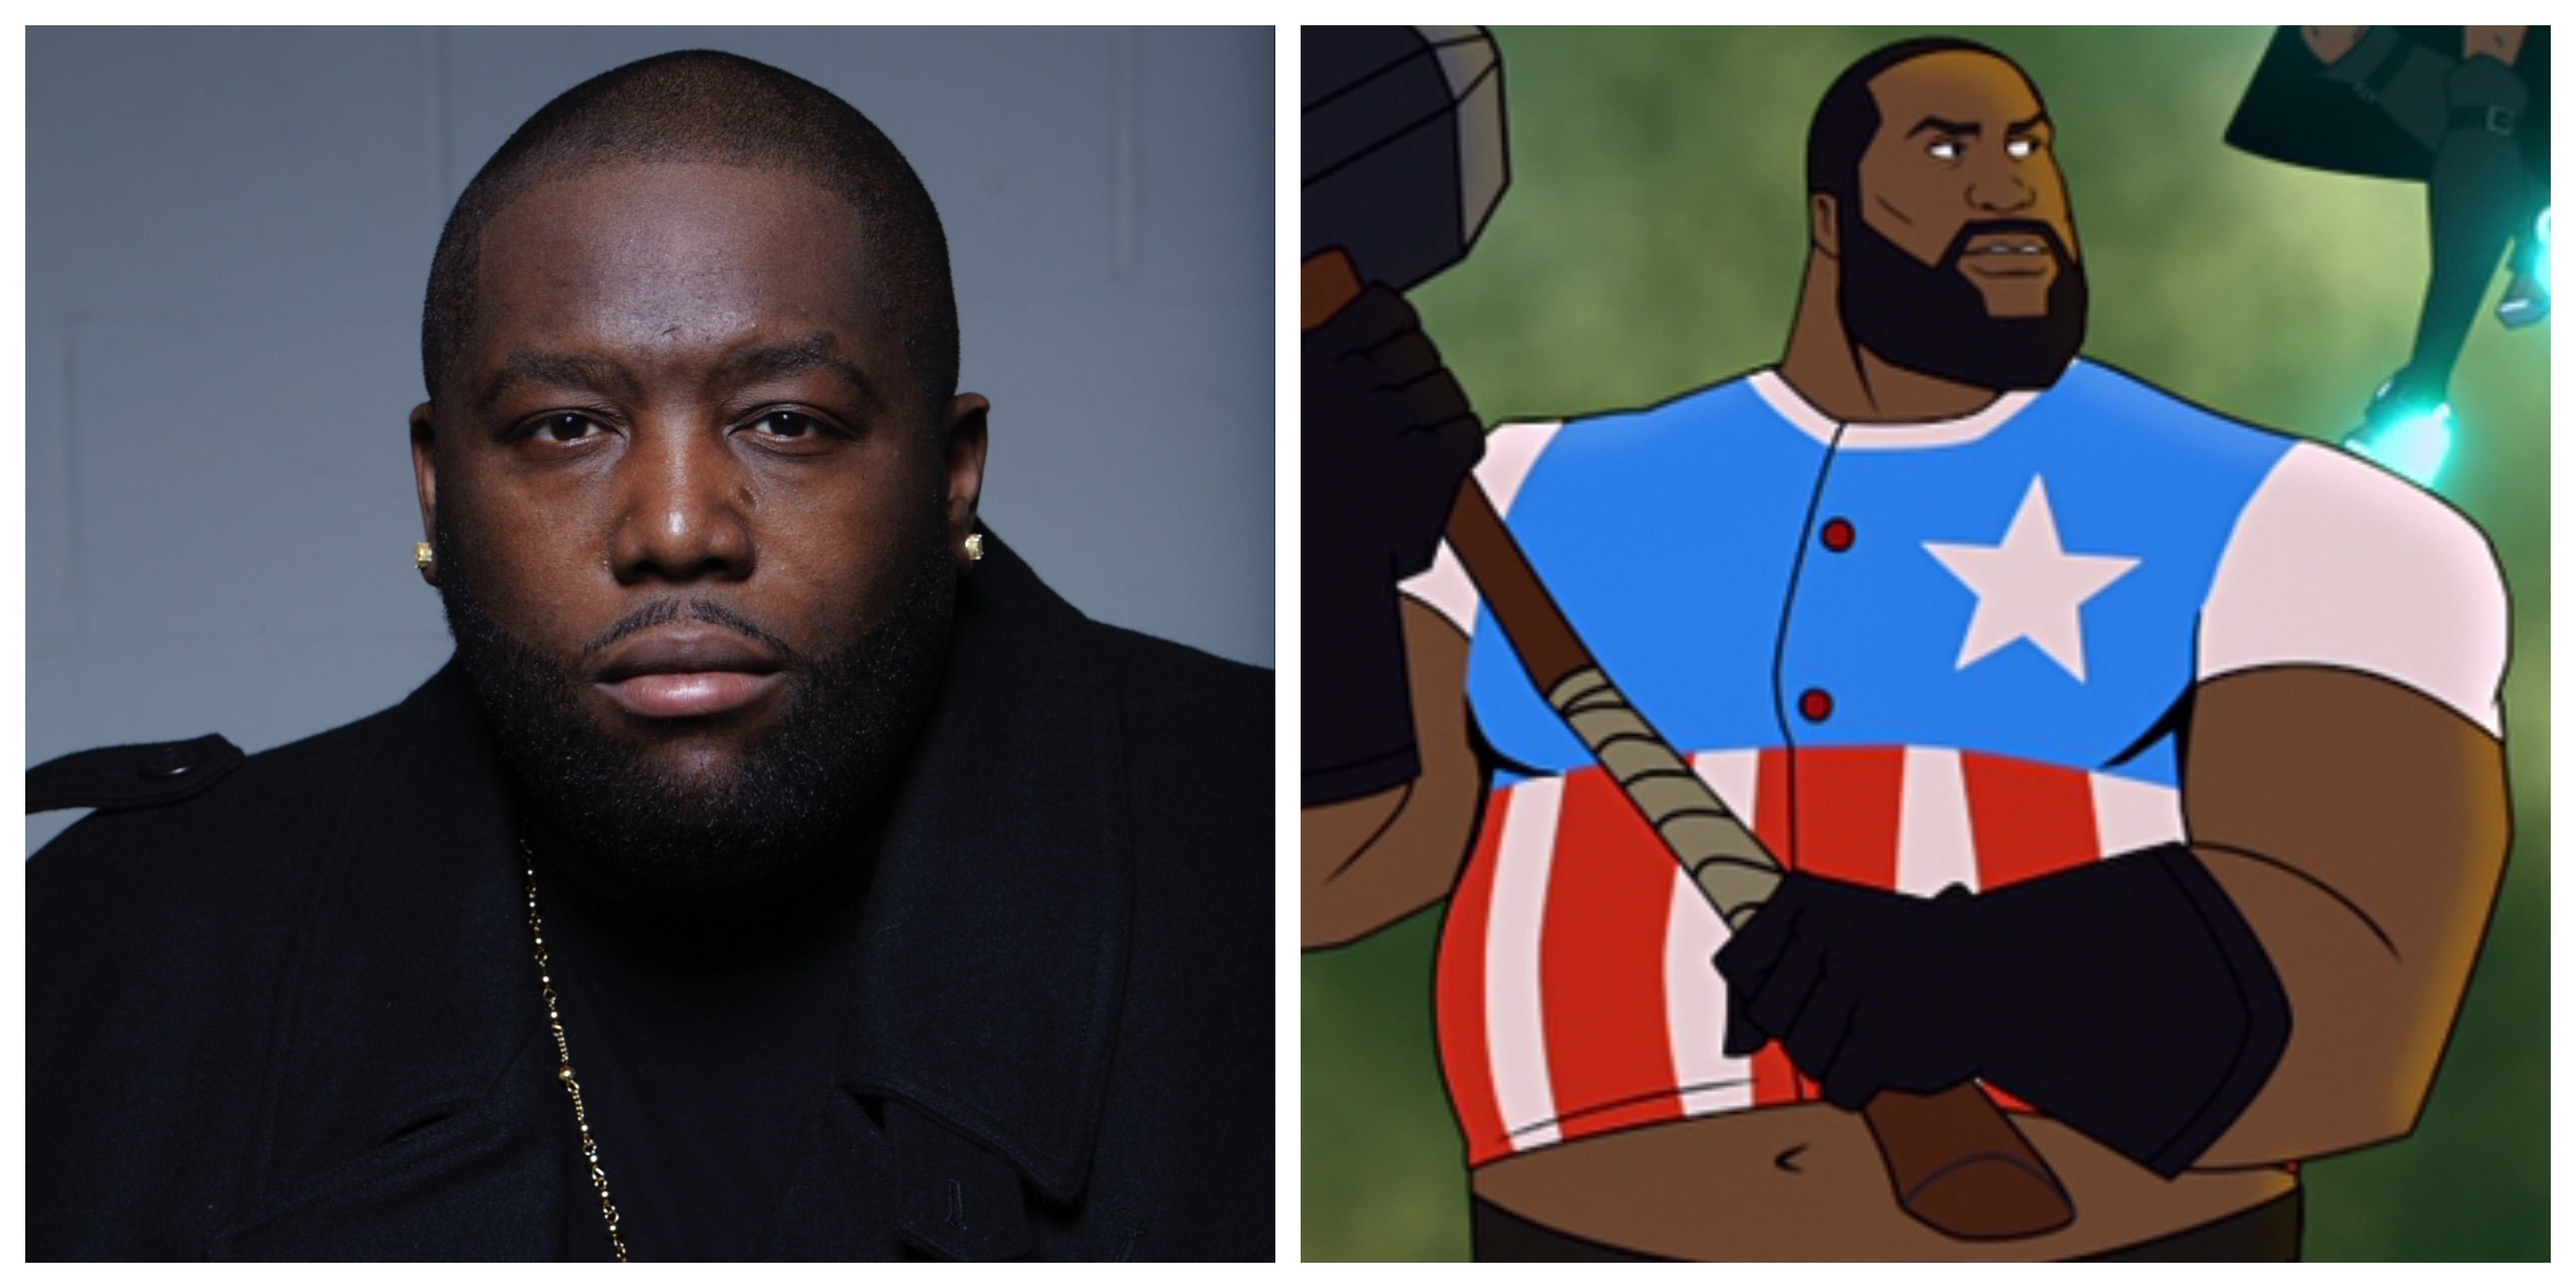 Killer Mike as John Henry in America: The Motion Picture on Netflix